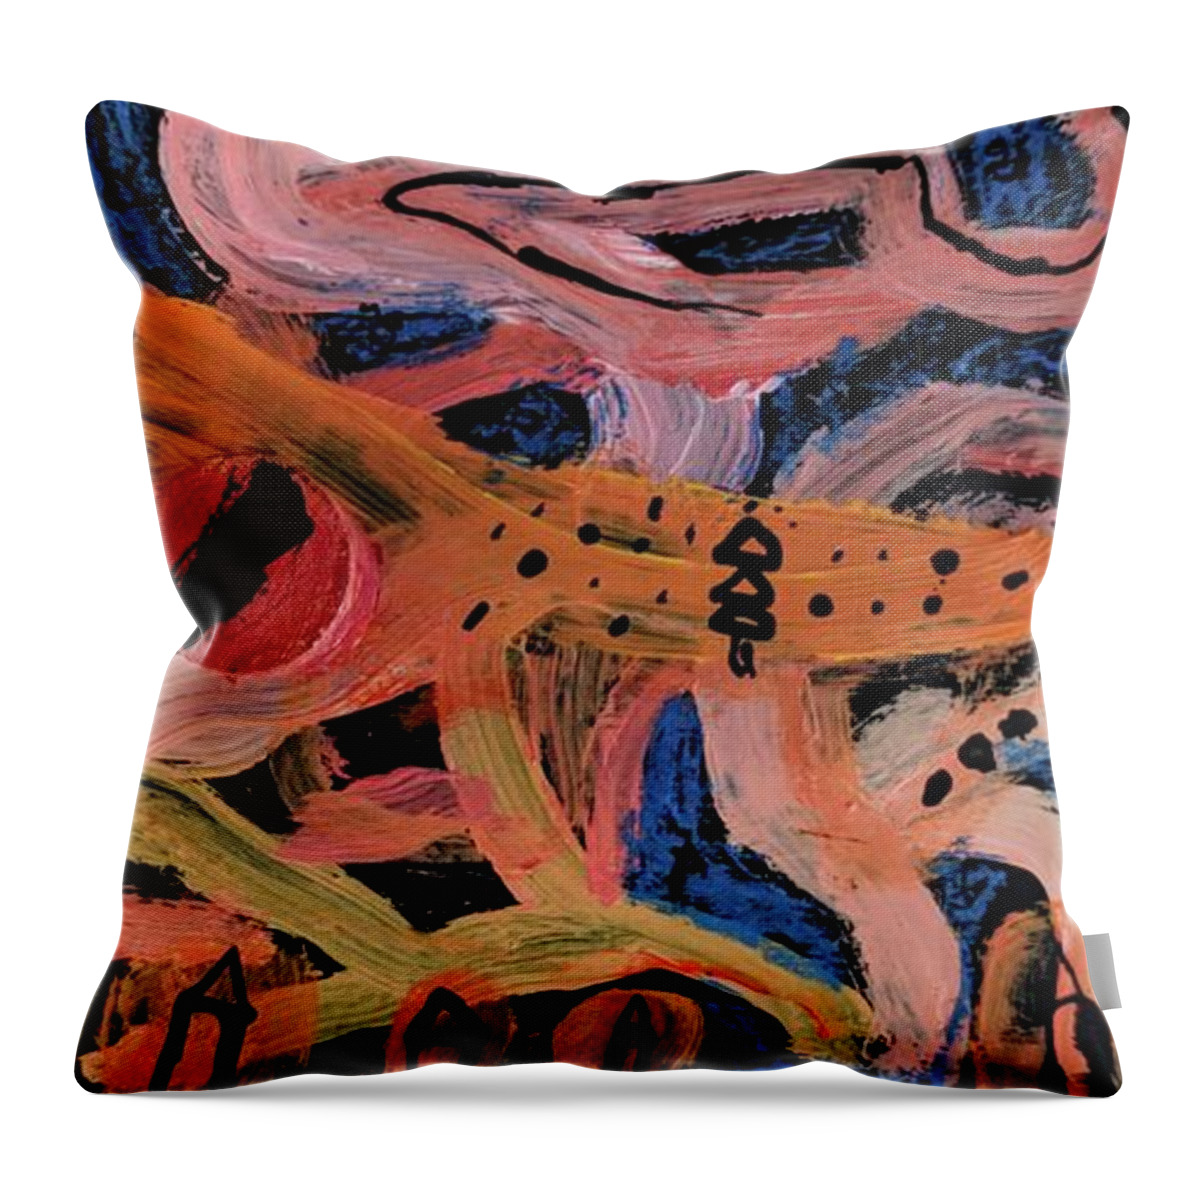  Throw Pillow featuring the painting Holiday Land by Abigail White